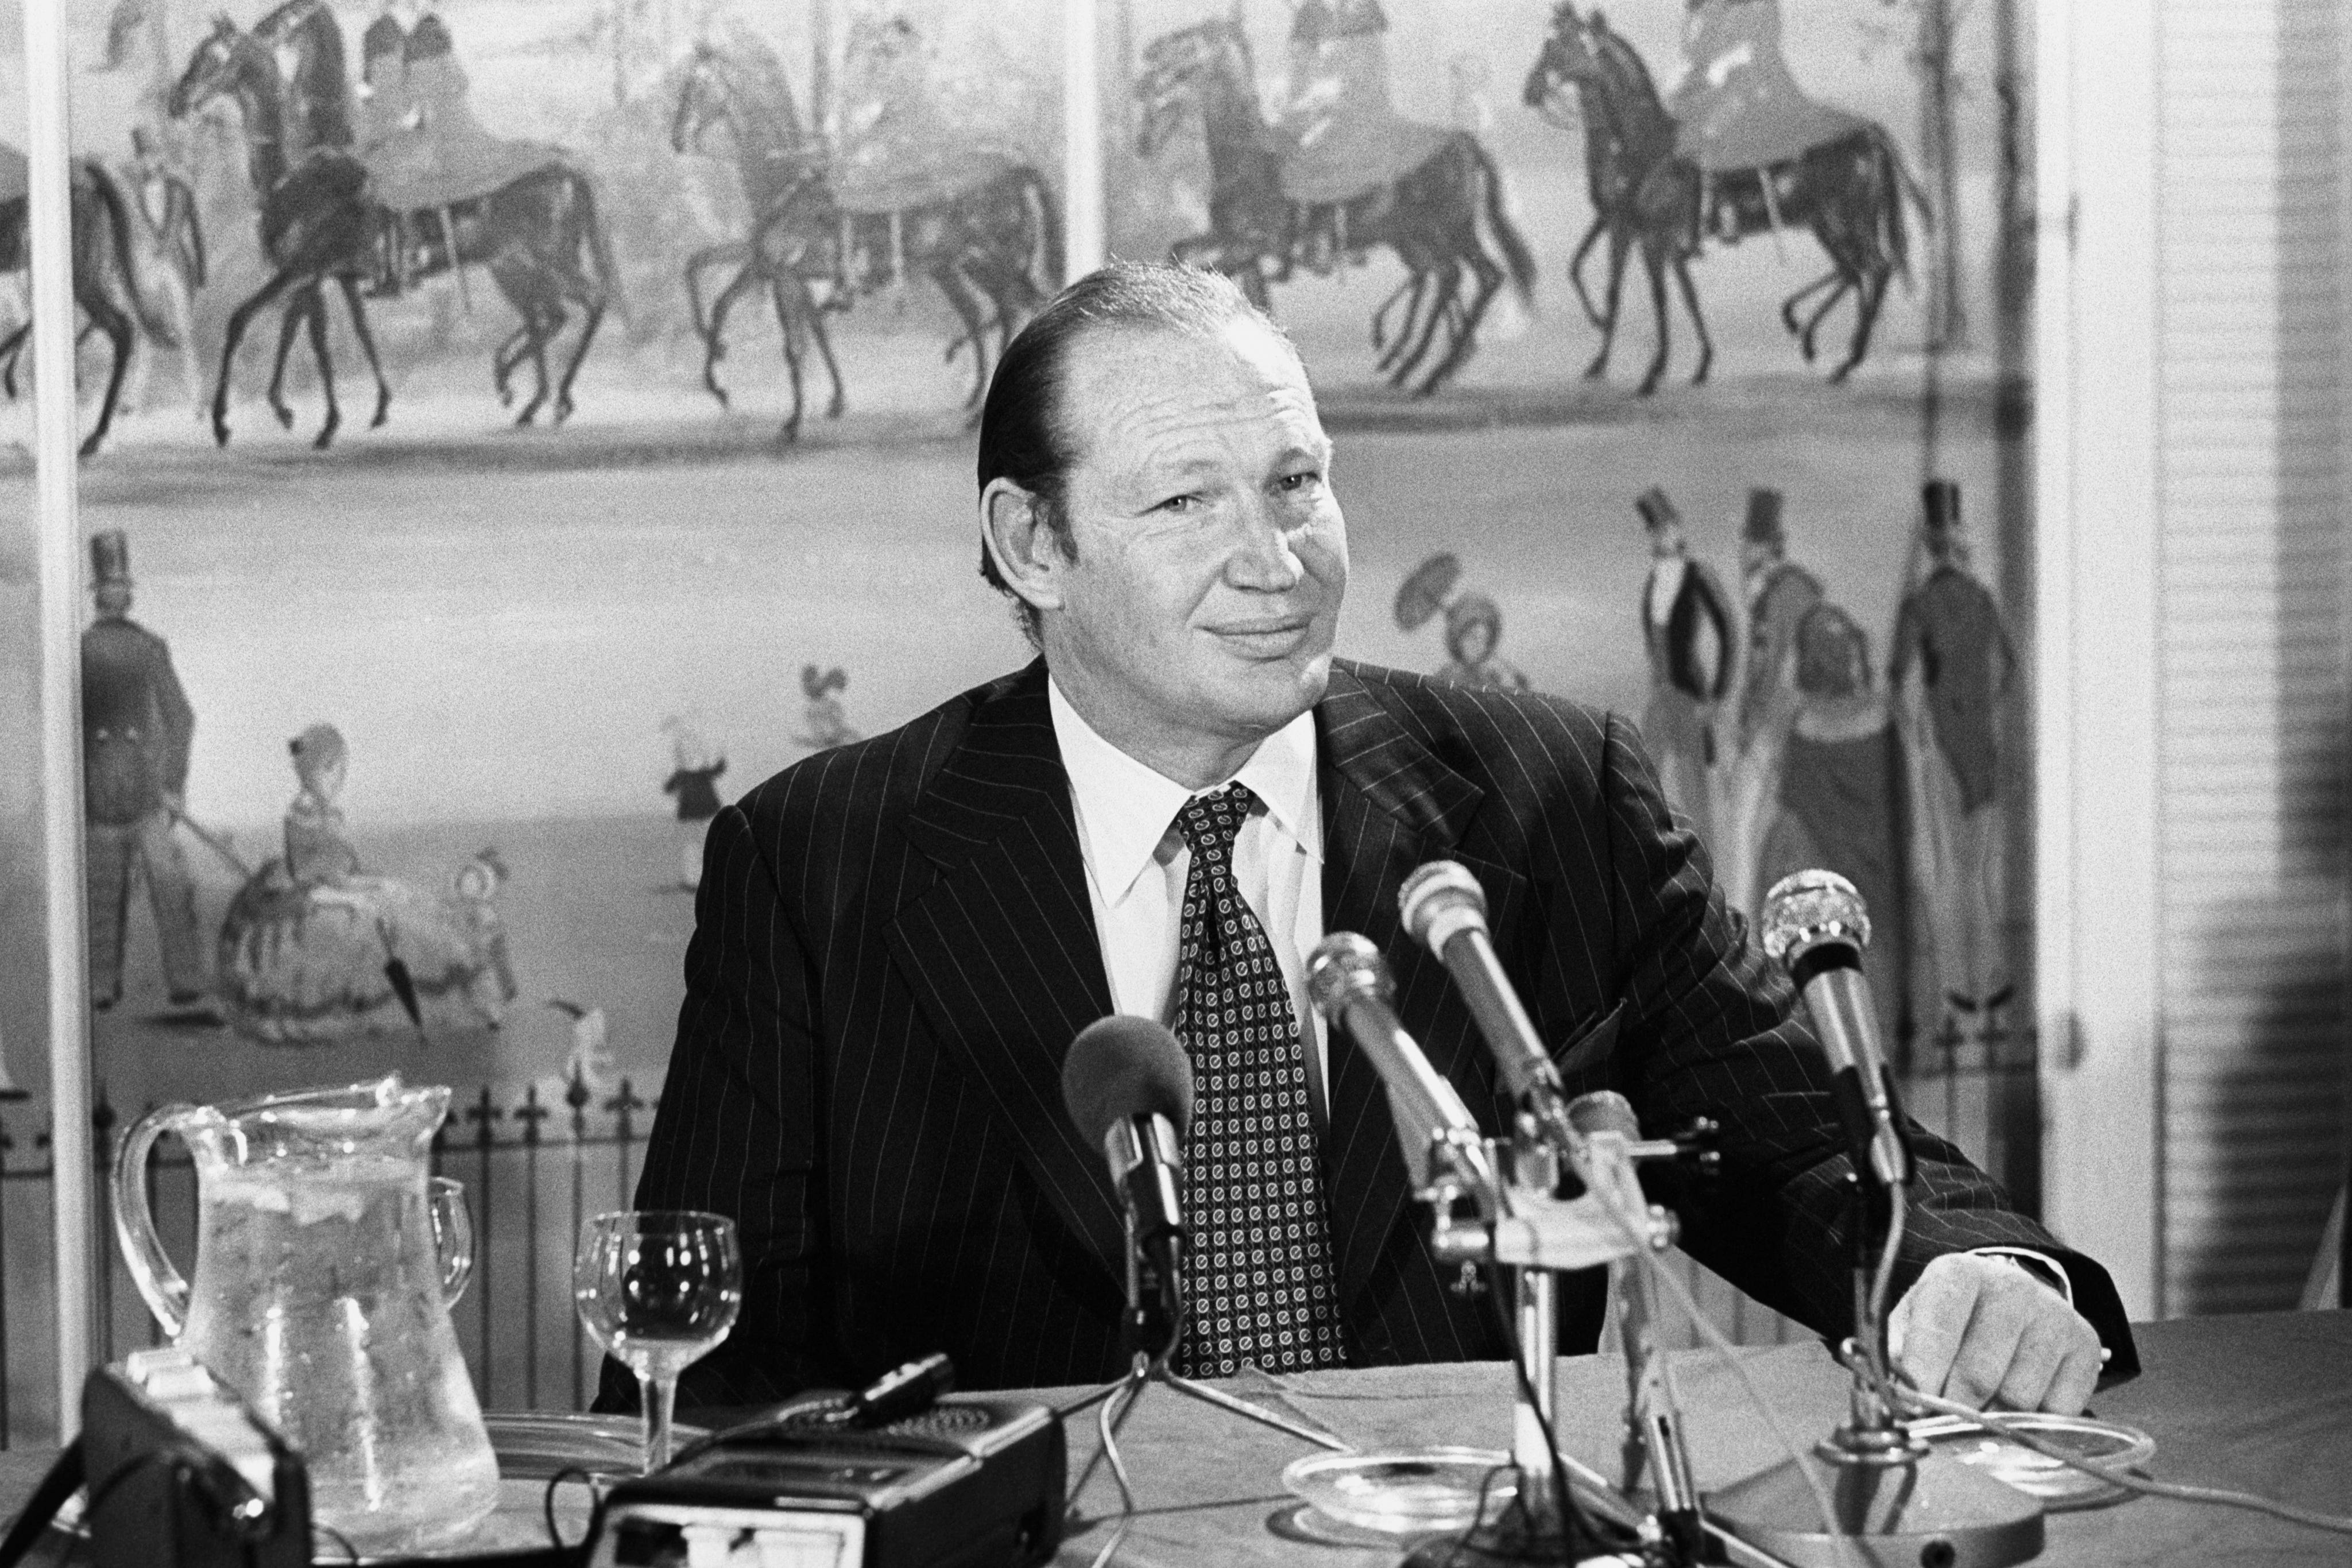 Australian media tycoon Kerry Packer, pictured, was put forward as an unlikely mediator in the battle by Margaret Thatcher’s government to suppress the ‘Spycatcher’ memoirs of ex-MI5 officer Peter Wright, according to newly released official papers (PA)